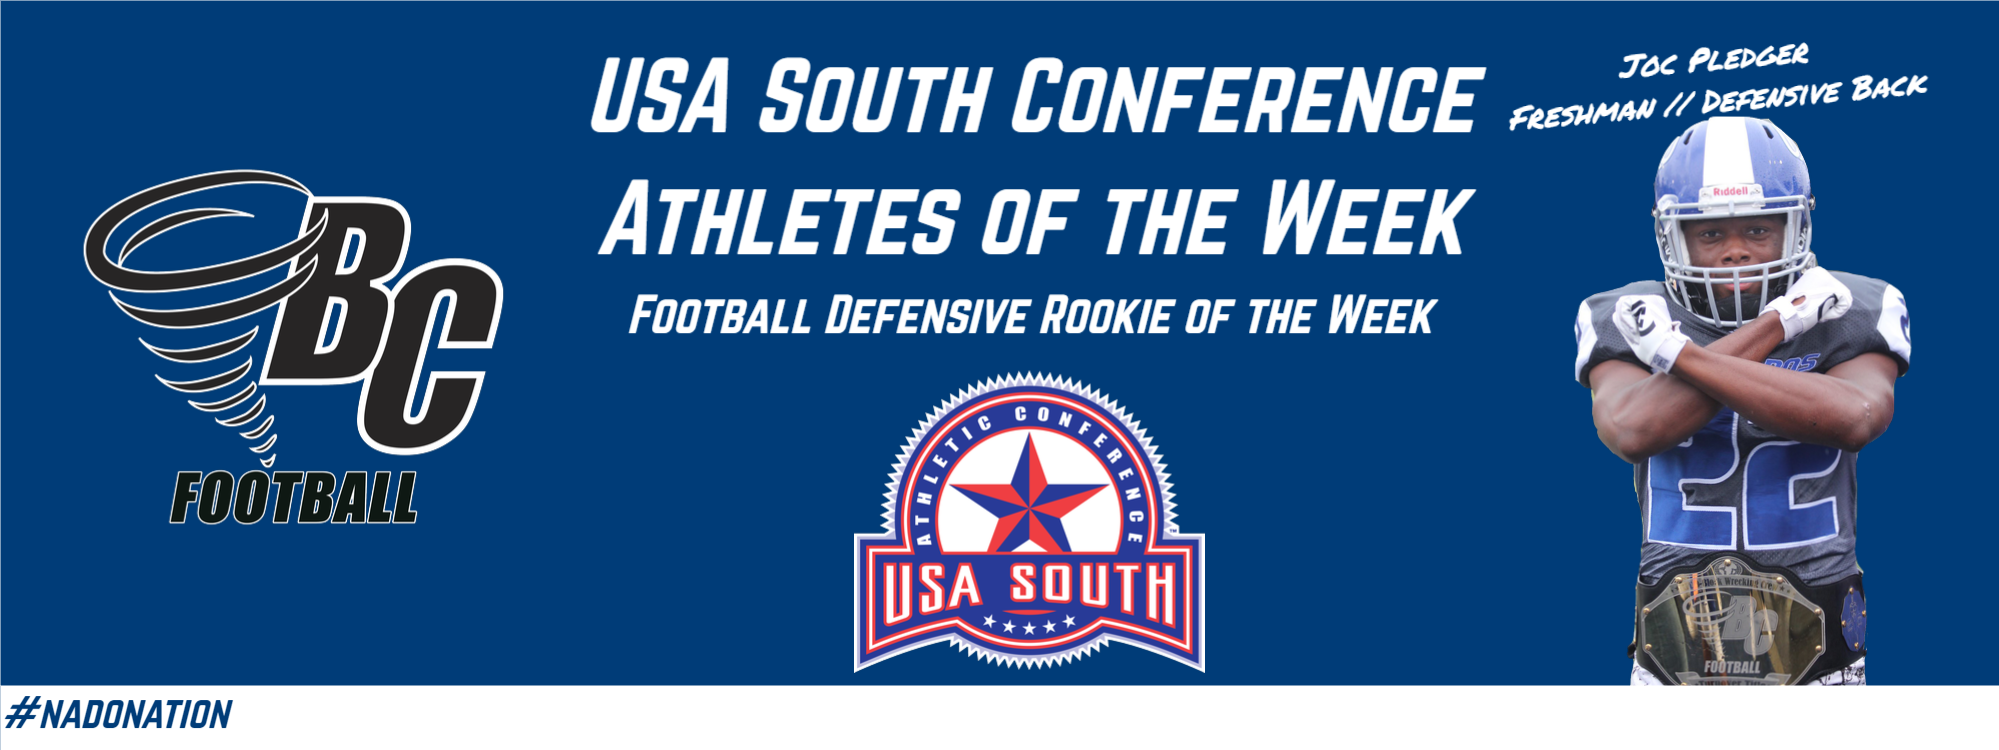 Joc Pledger Secures USA South Football Defensive Rookie of the Week Award